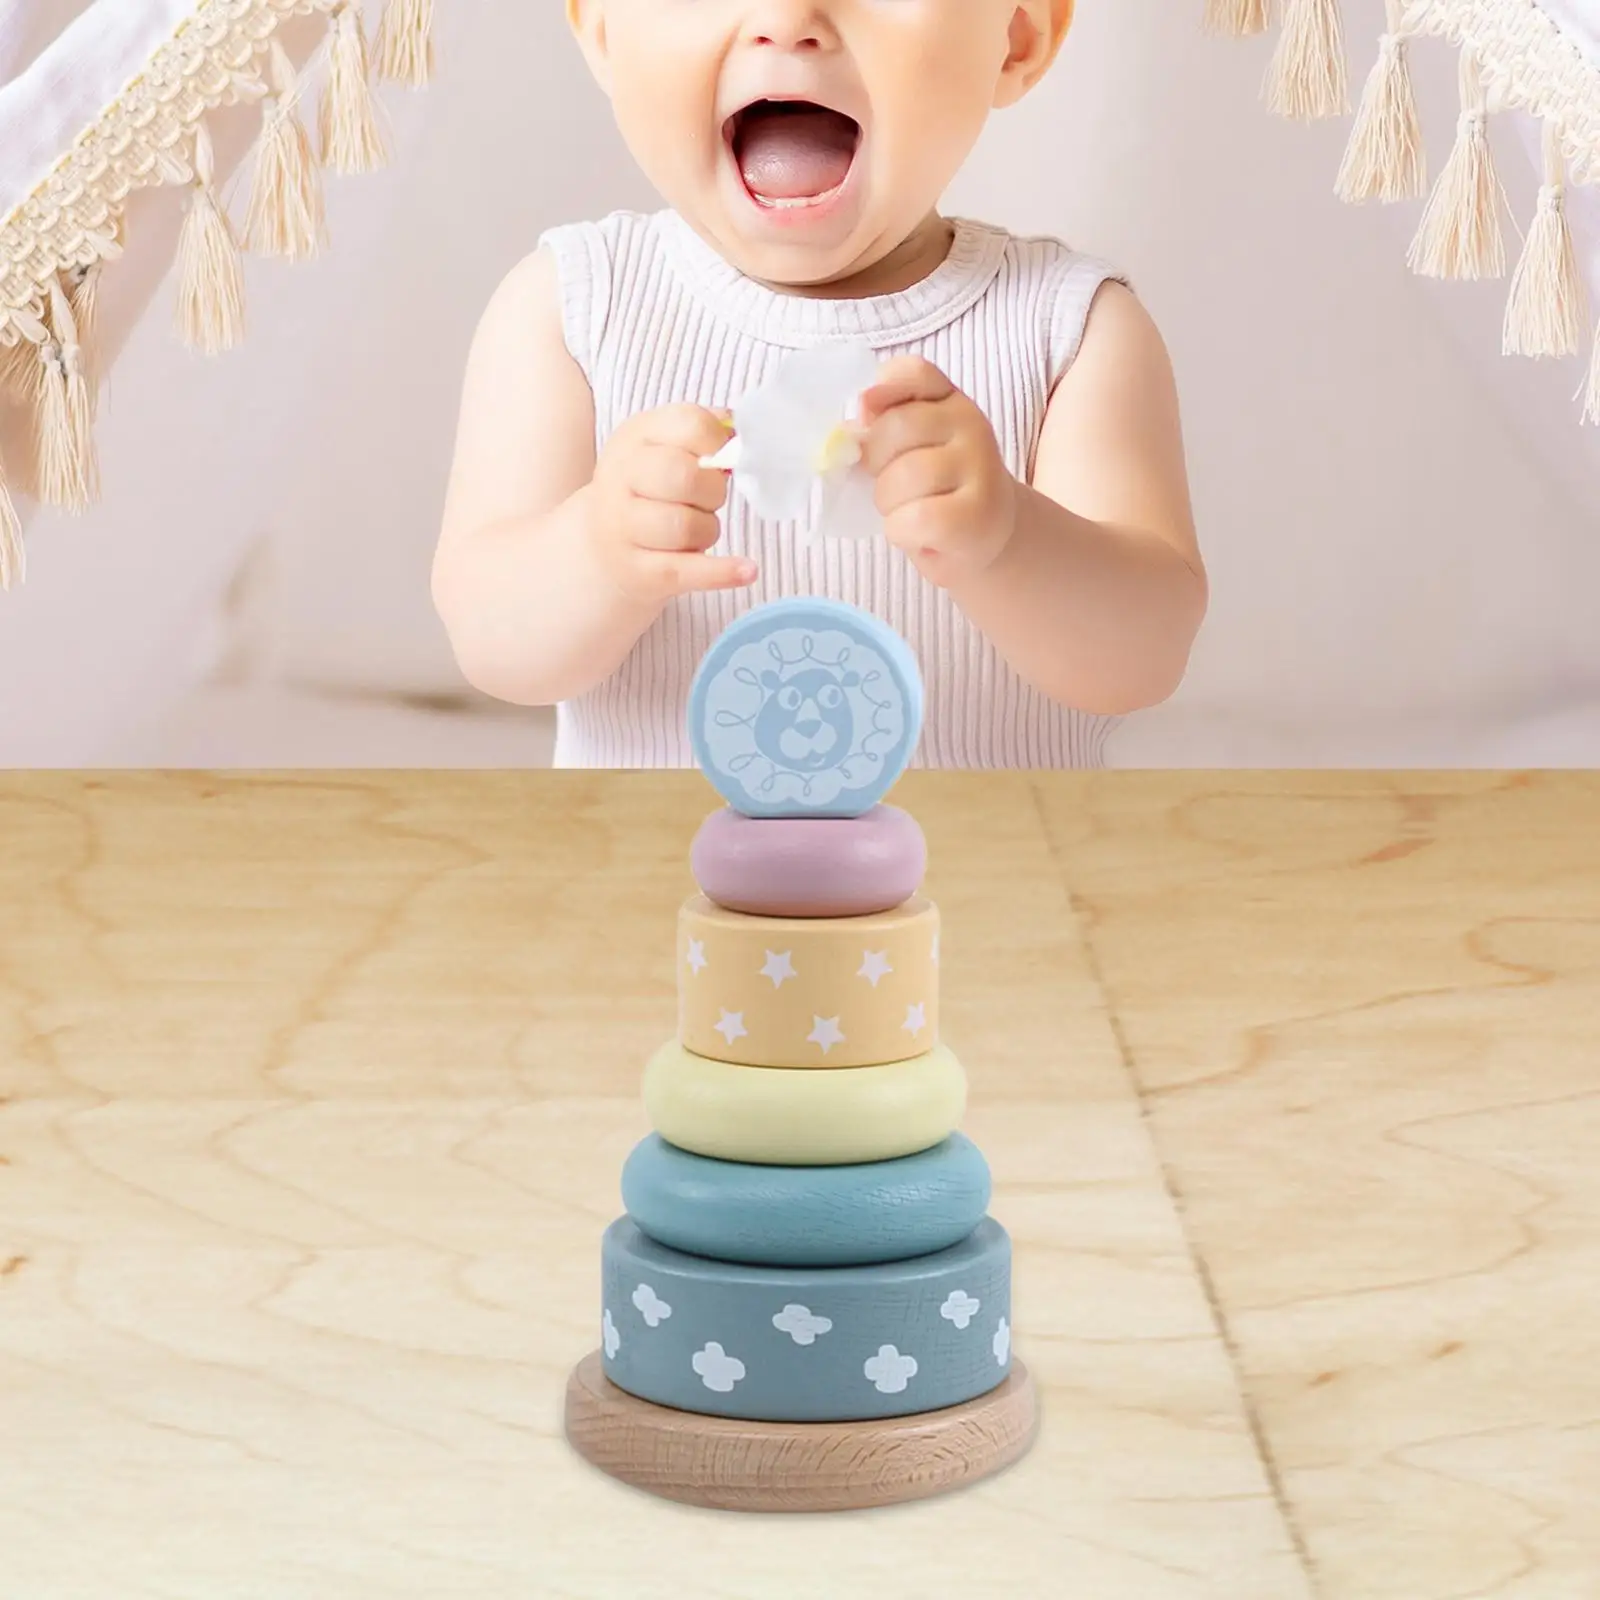 

Baby Stacking Toy Nesting Toy Hand Eye Coordination Stem Learning Toy Classic Toy Sensory Toy Baby Toys for Kid Boy Girls Gifts